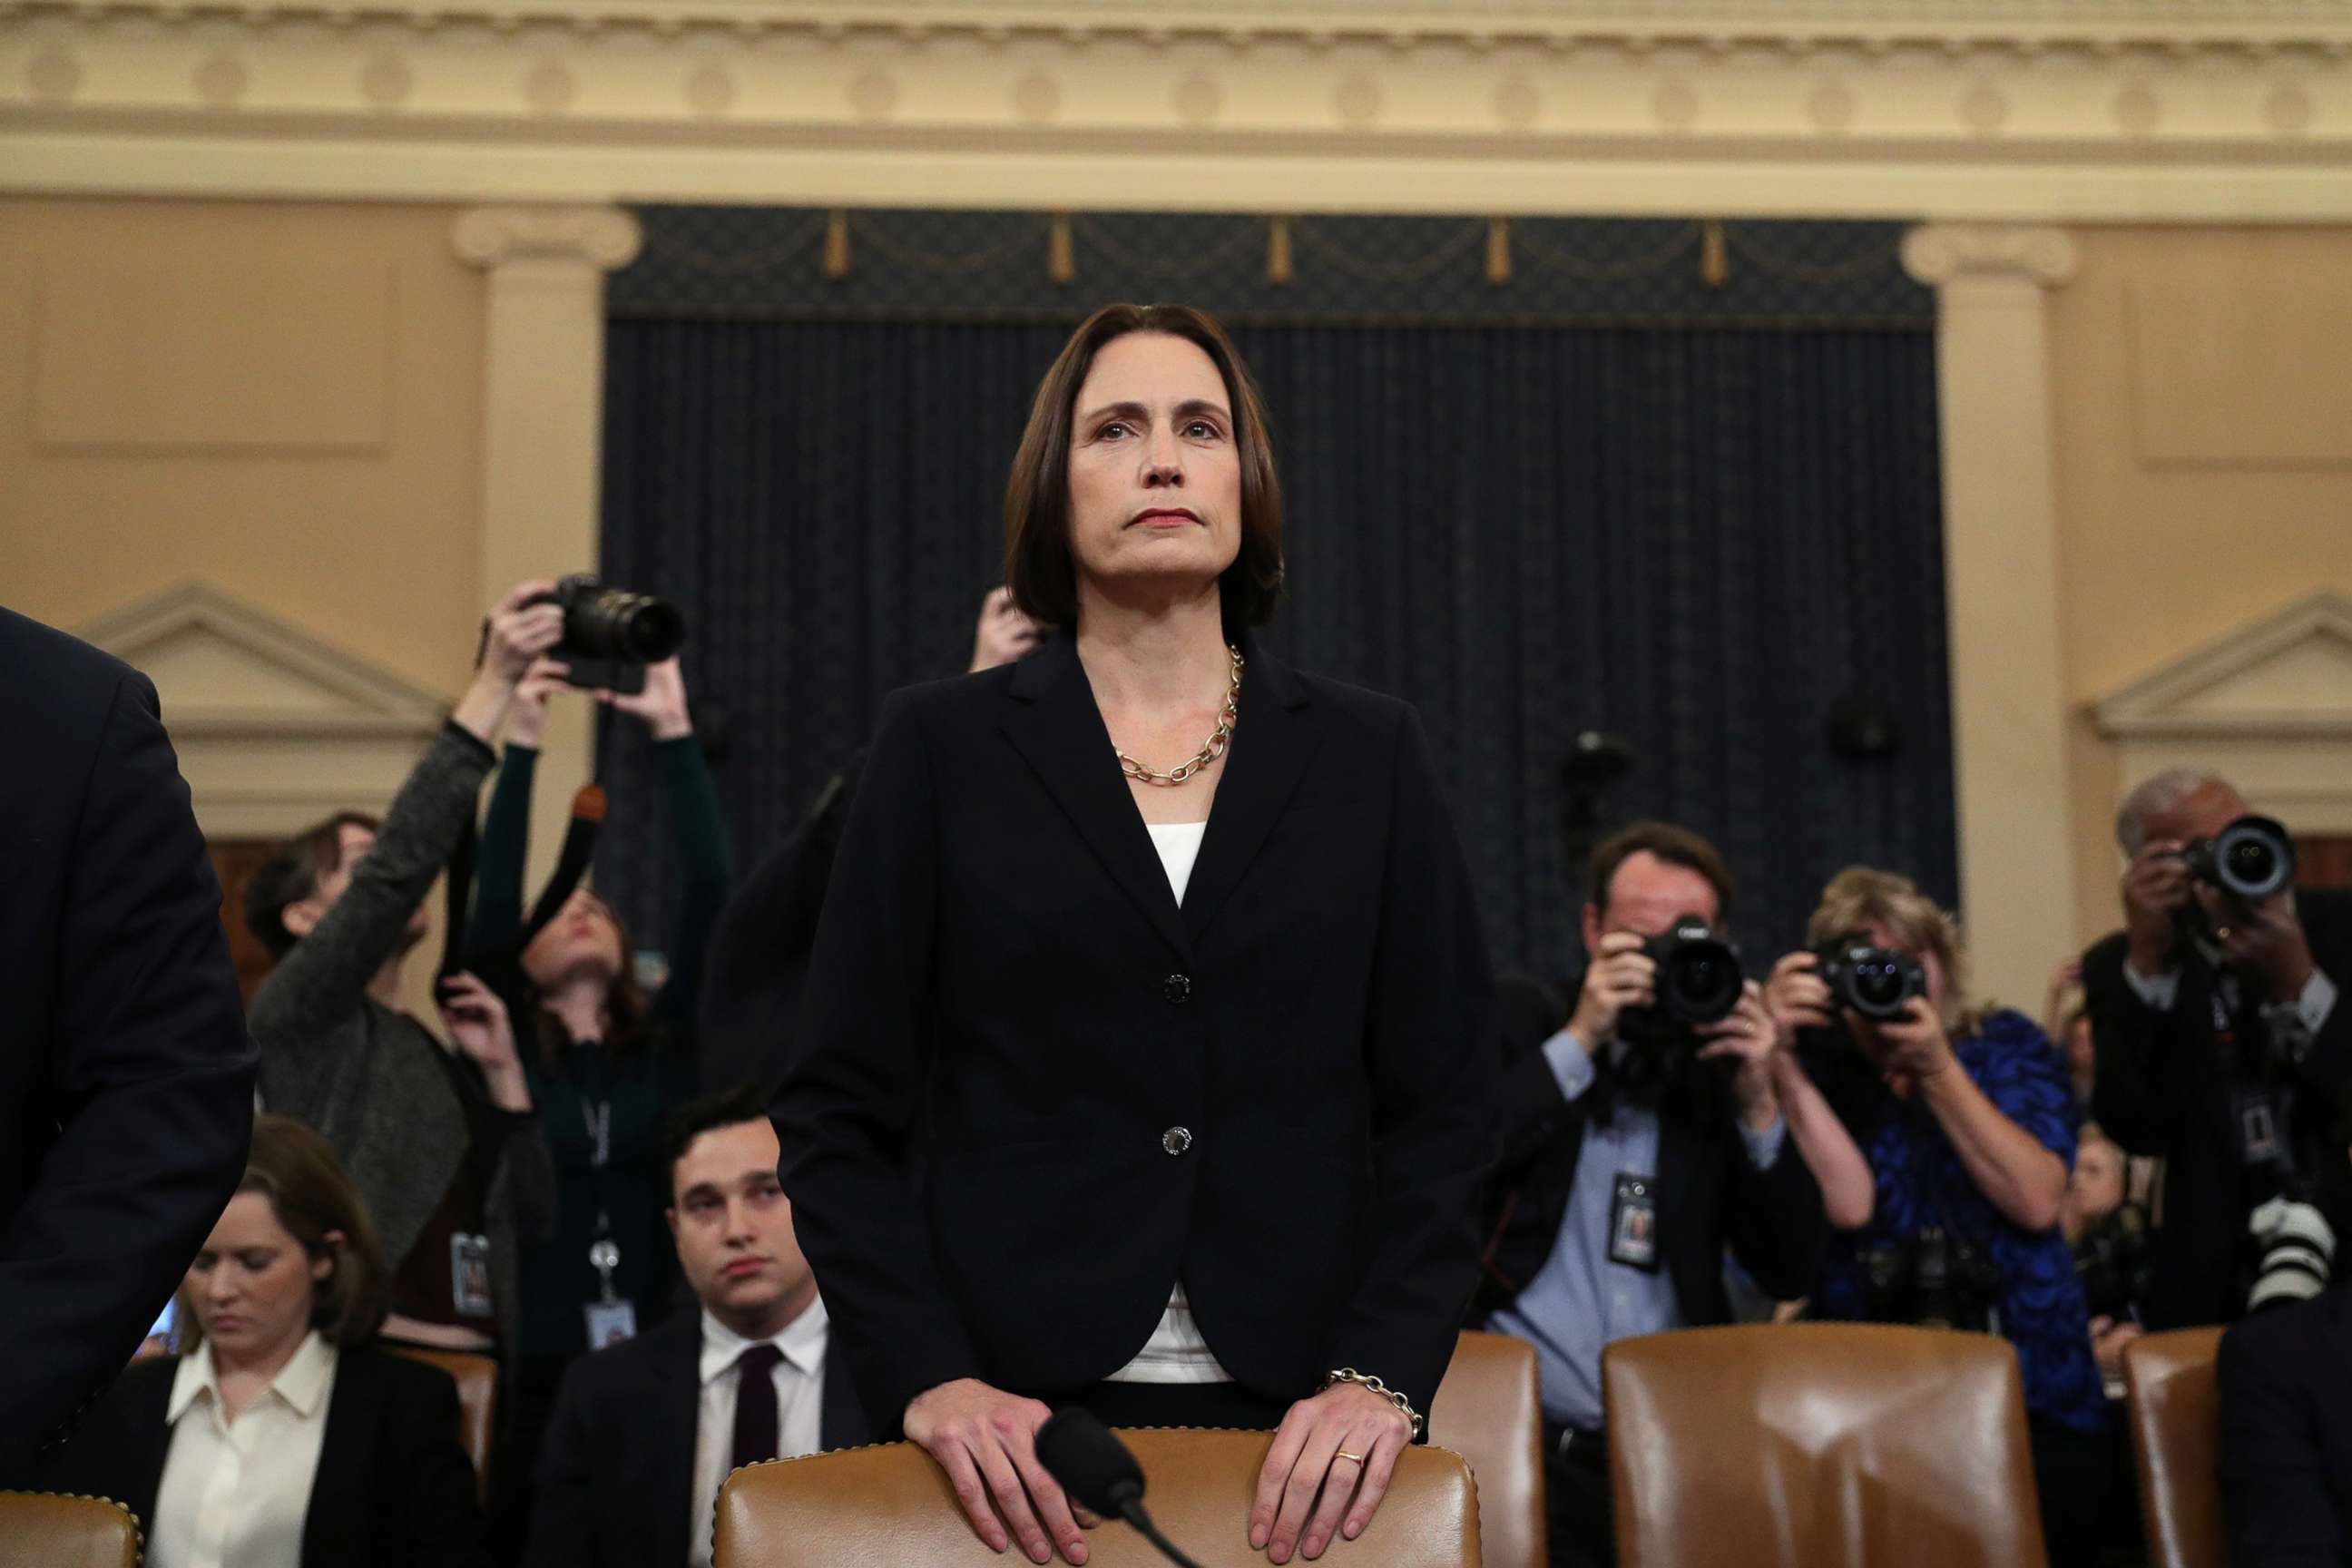 PHOTO: Fiona Hill, former senior director for Europe and Russia on the National Security Council before she testify to a House Intelligence Committee hearing in Washington, D.C., Nov. 21, 2019.